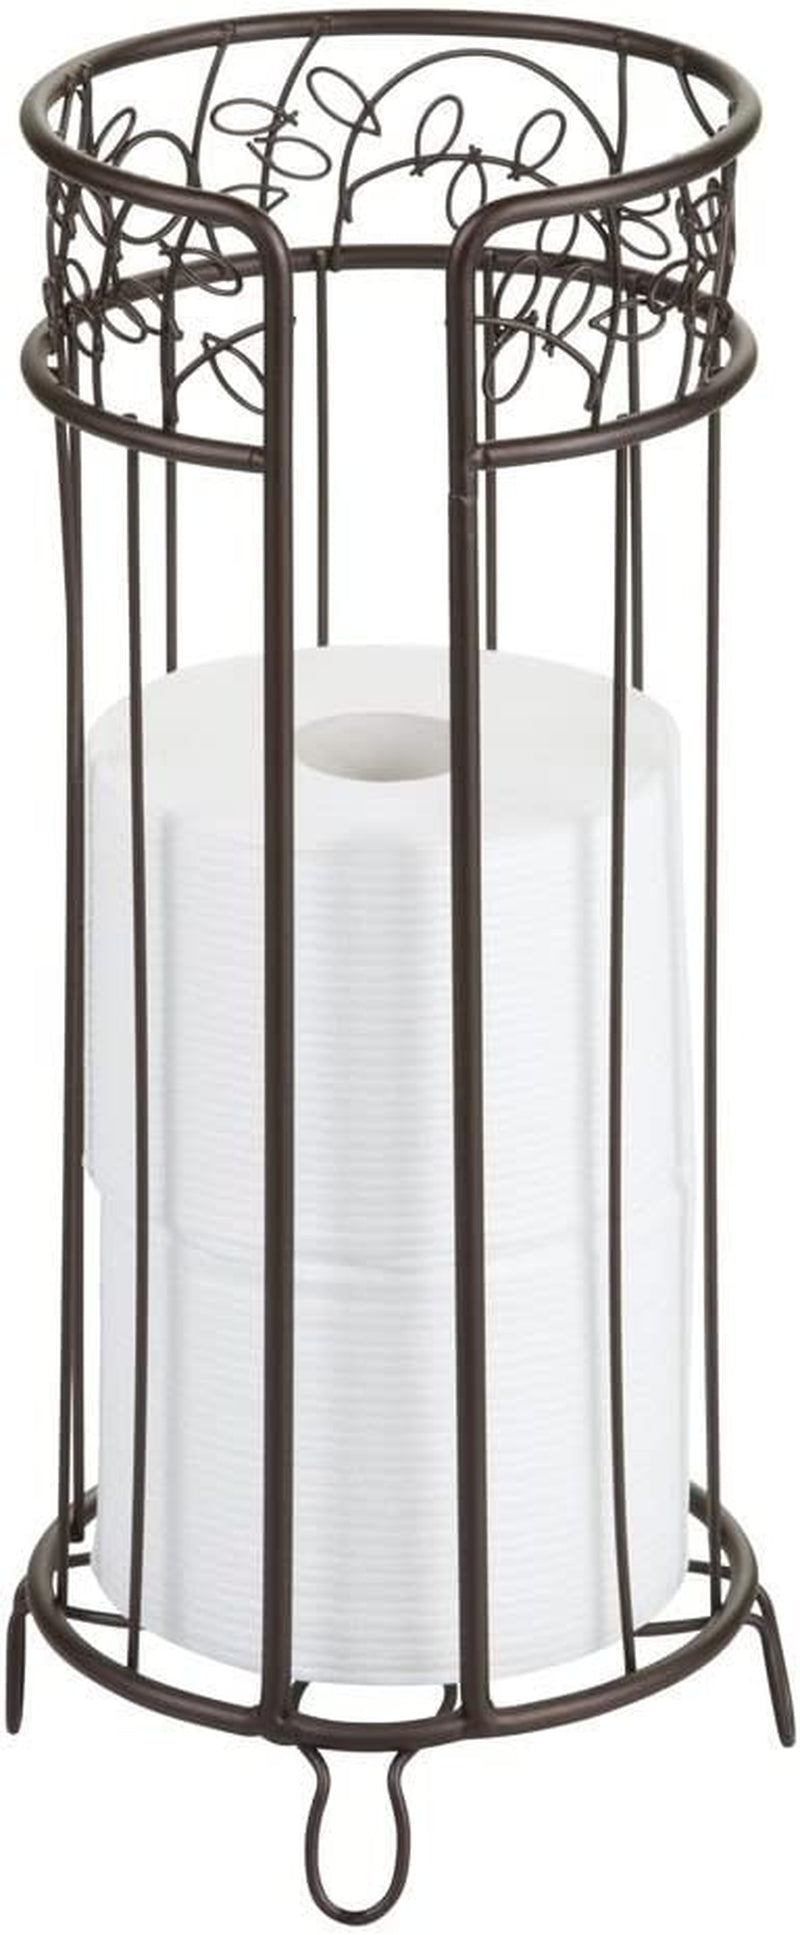 Bronze Metal Tissue Holder Stand – Holds 3 Rolls of Toilet Paper